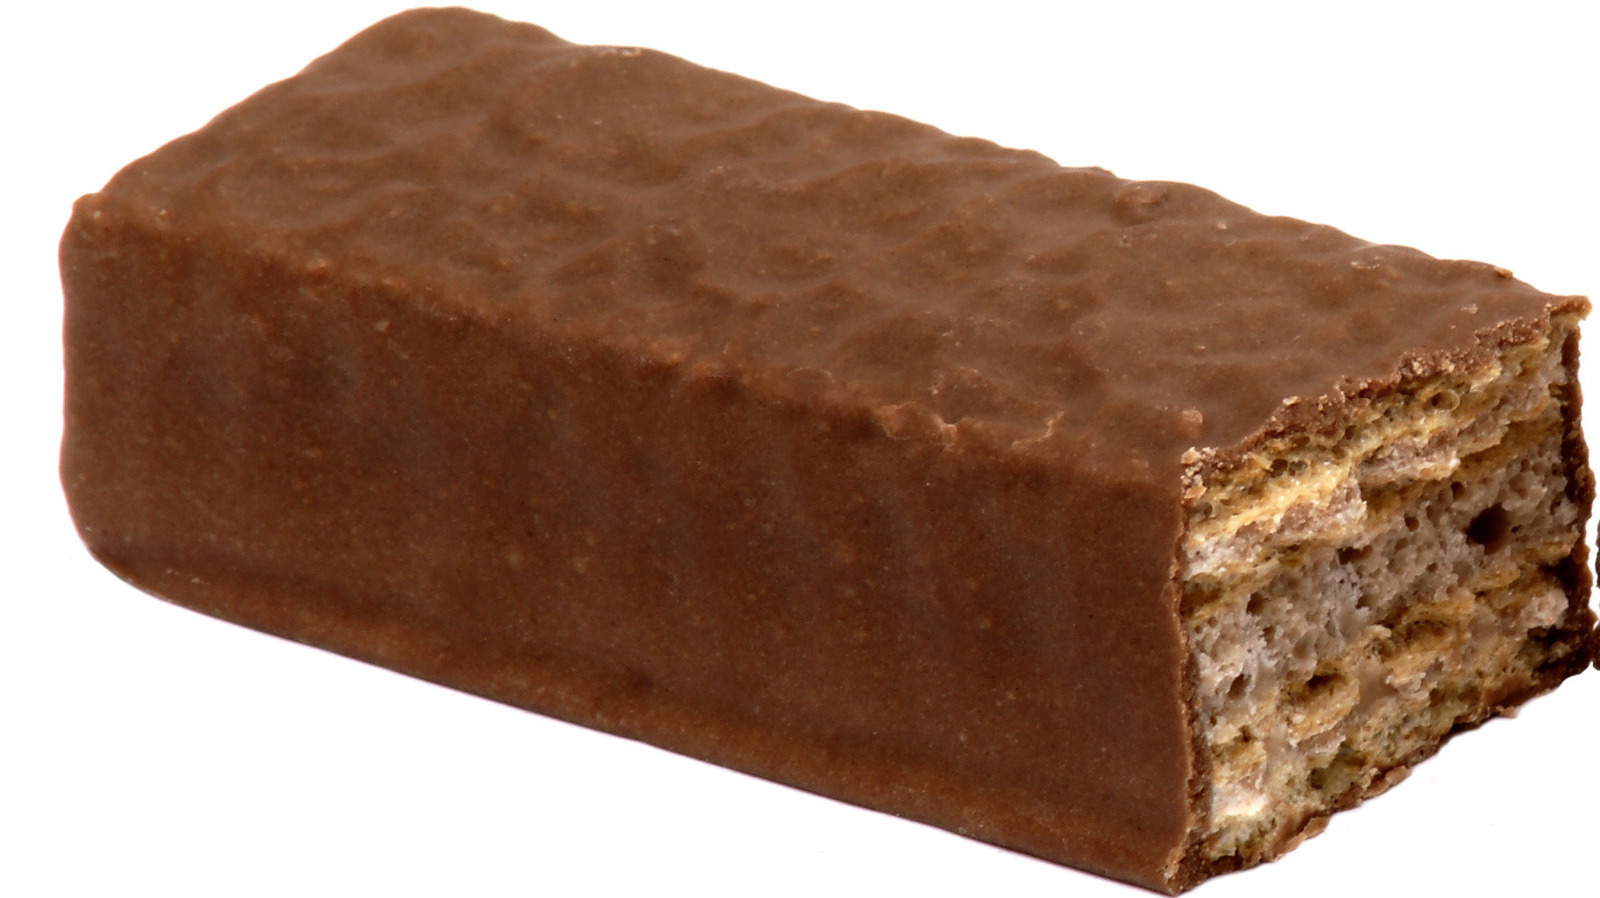 Coffee Crisp Is One Of Canada's Most Beloved Chocolate Bars